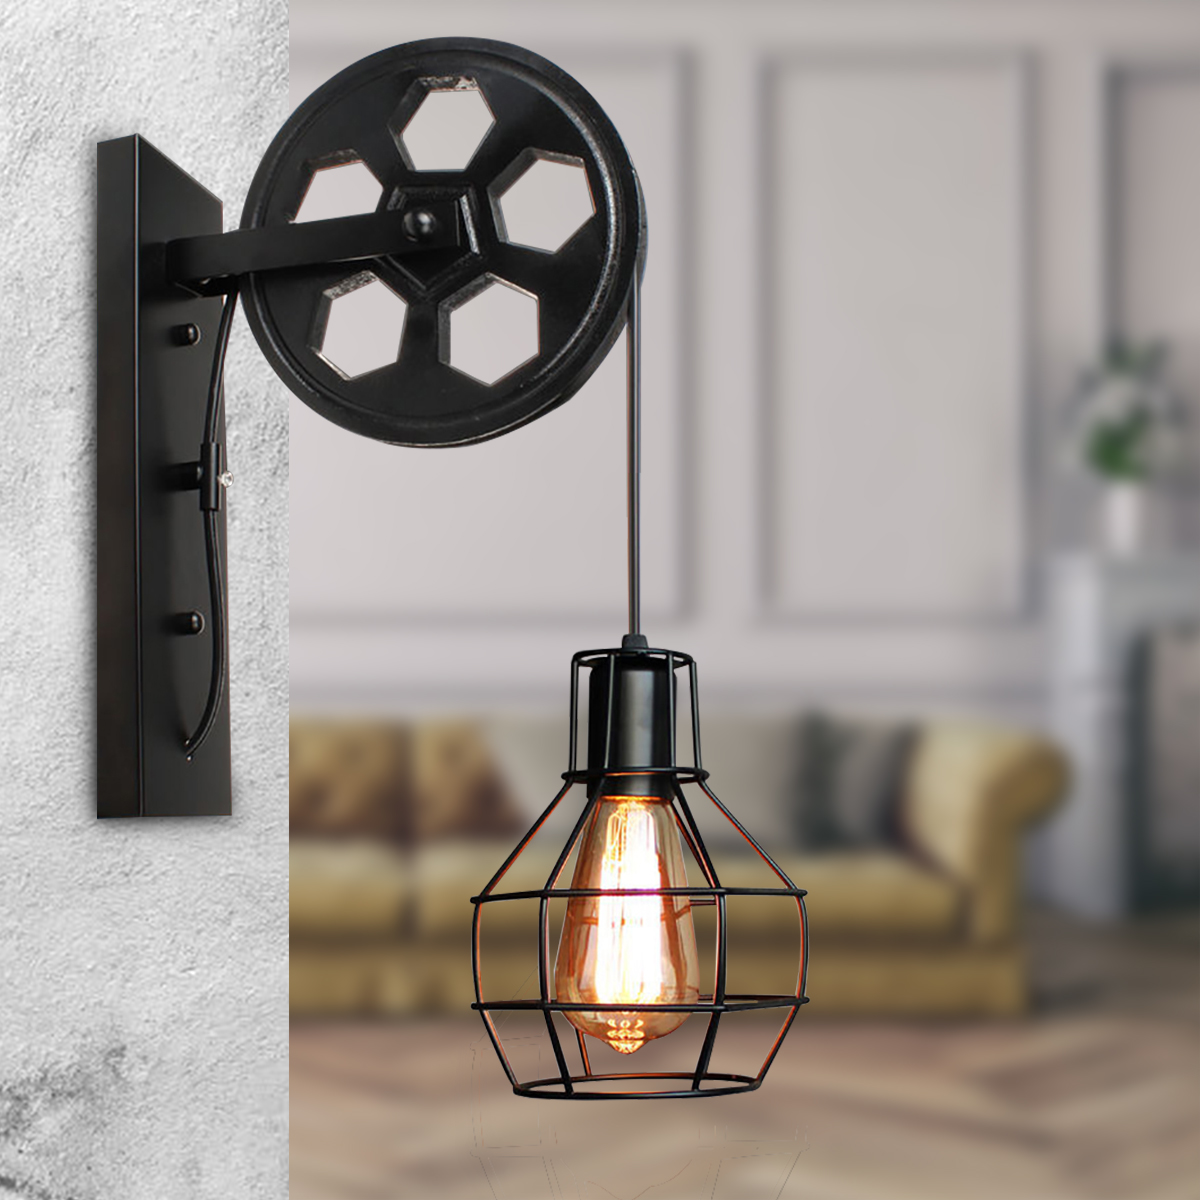 Adjustable-Retro-Iron-Wall-Lamp-Lifting-Pulley-E27-Sconce-Light-Indoor-4-Color-Without-Light-Bulb-1709520-7